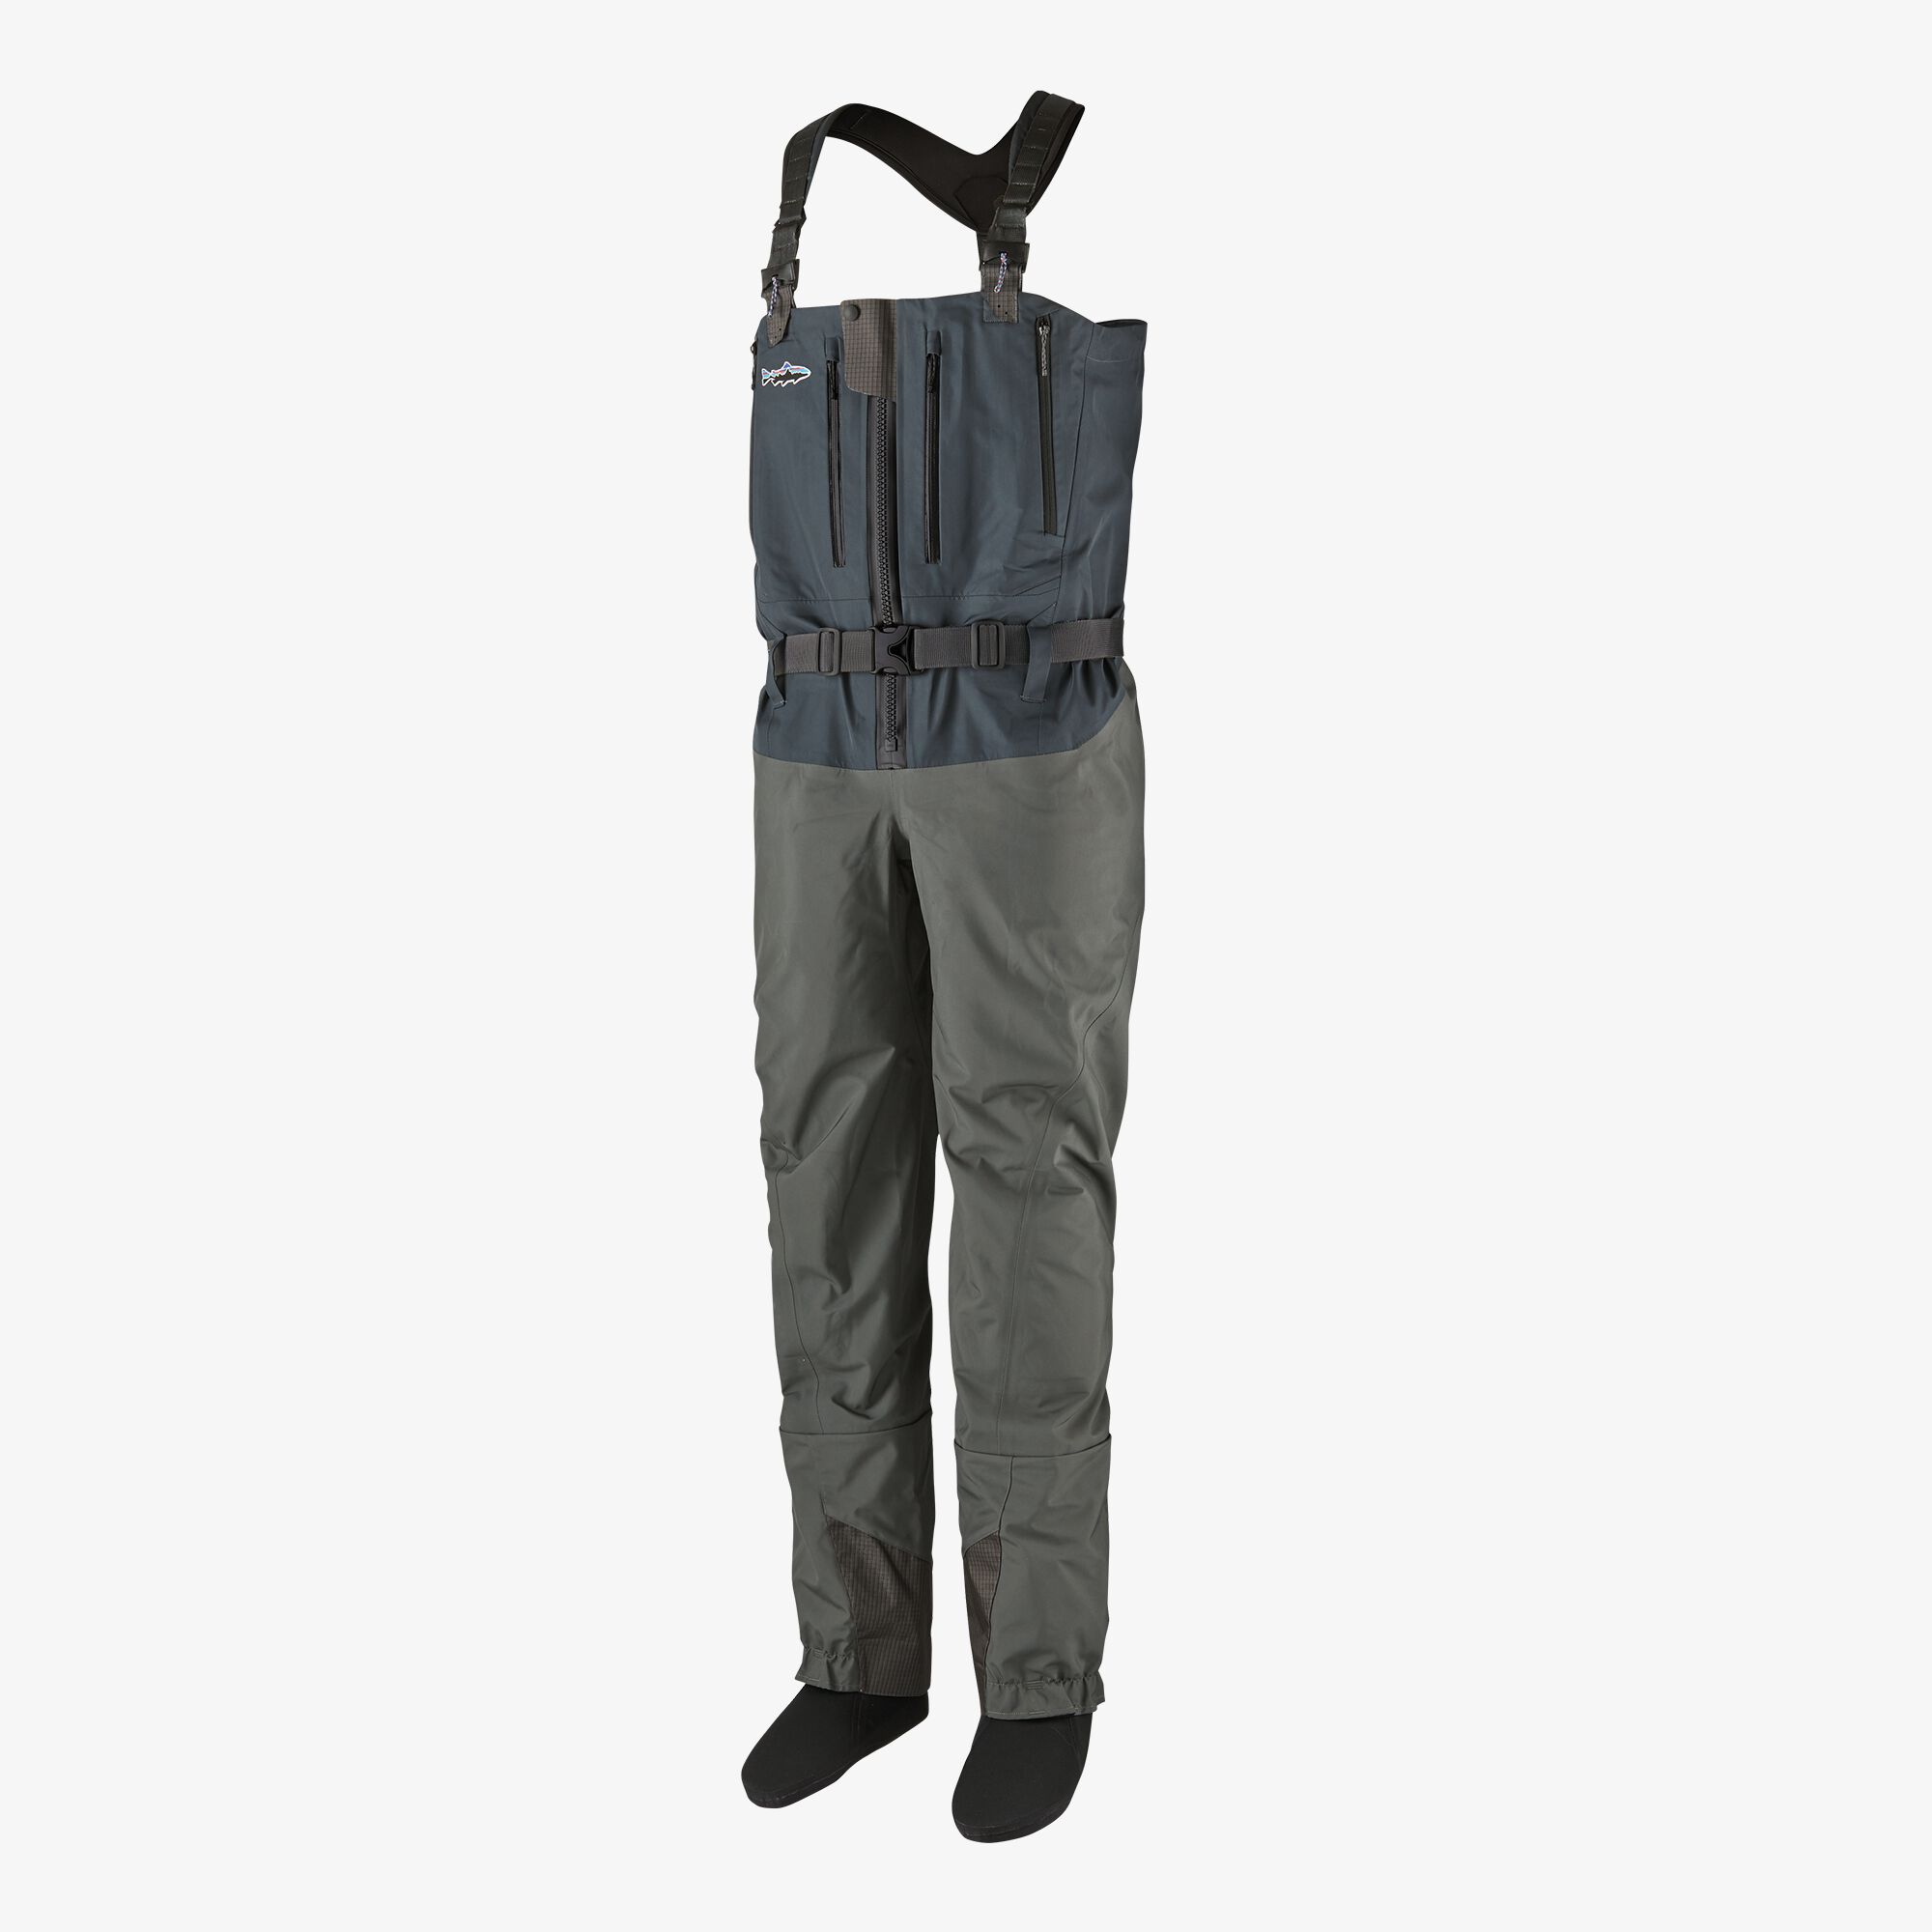 PATAGONIA SWIFTCURRENT EXPEDITION ZIP-FRONT WADER - FORGE GREY - SRM